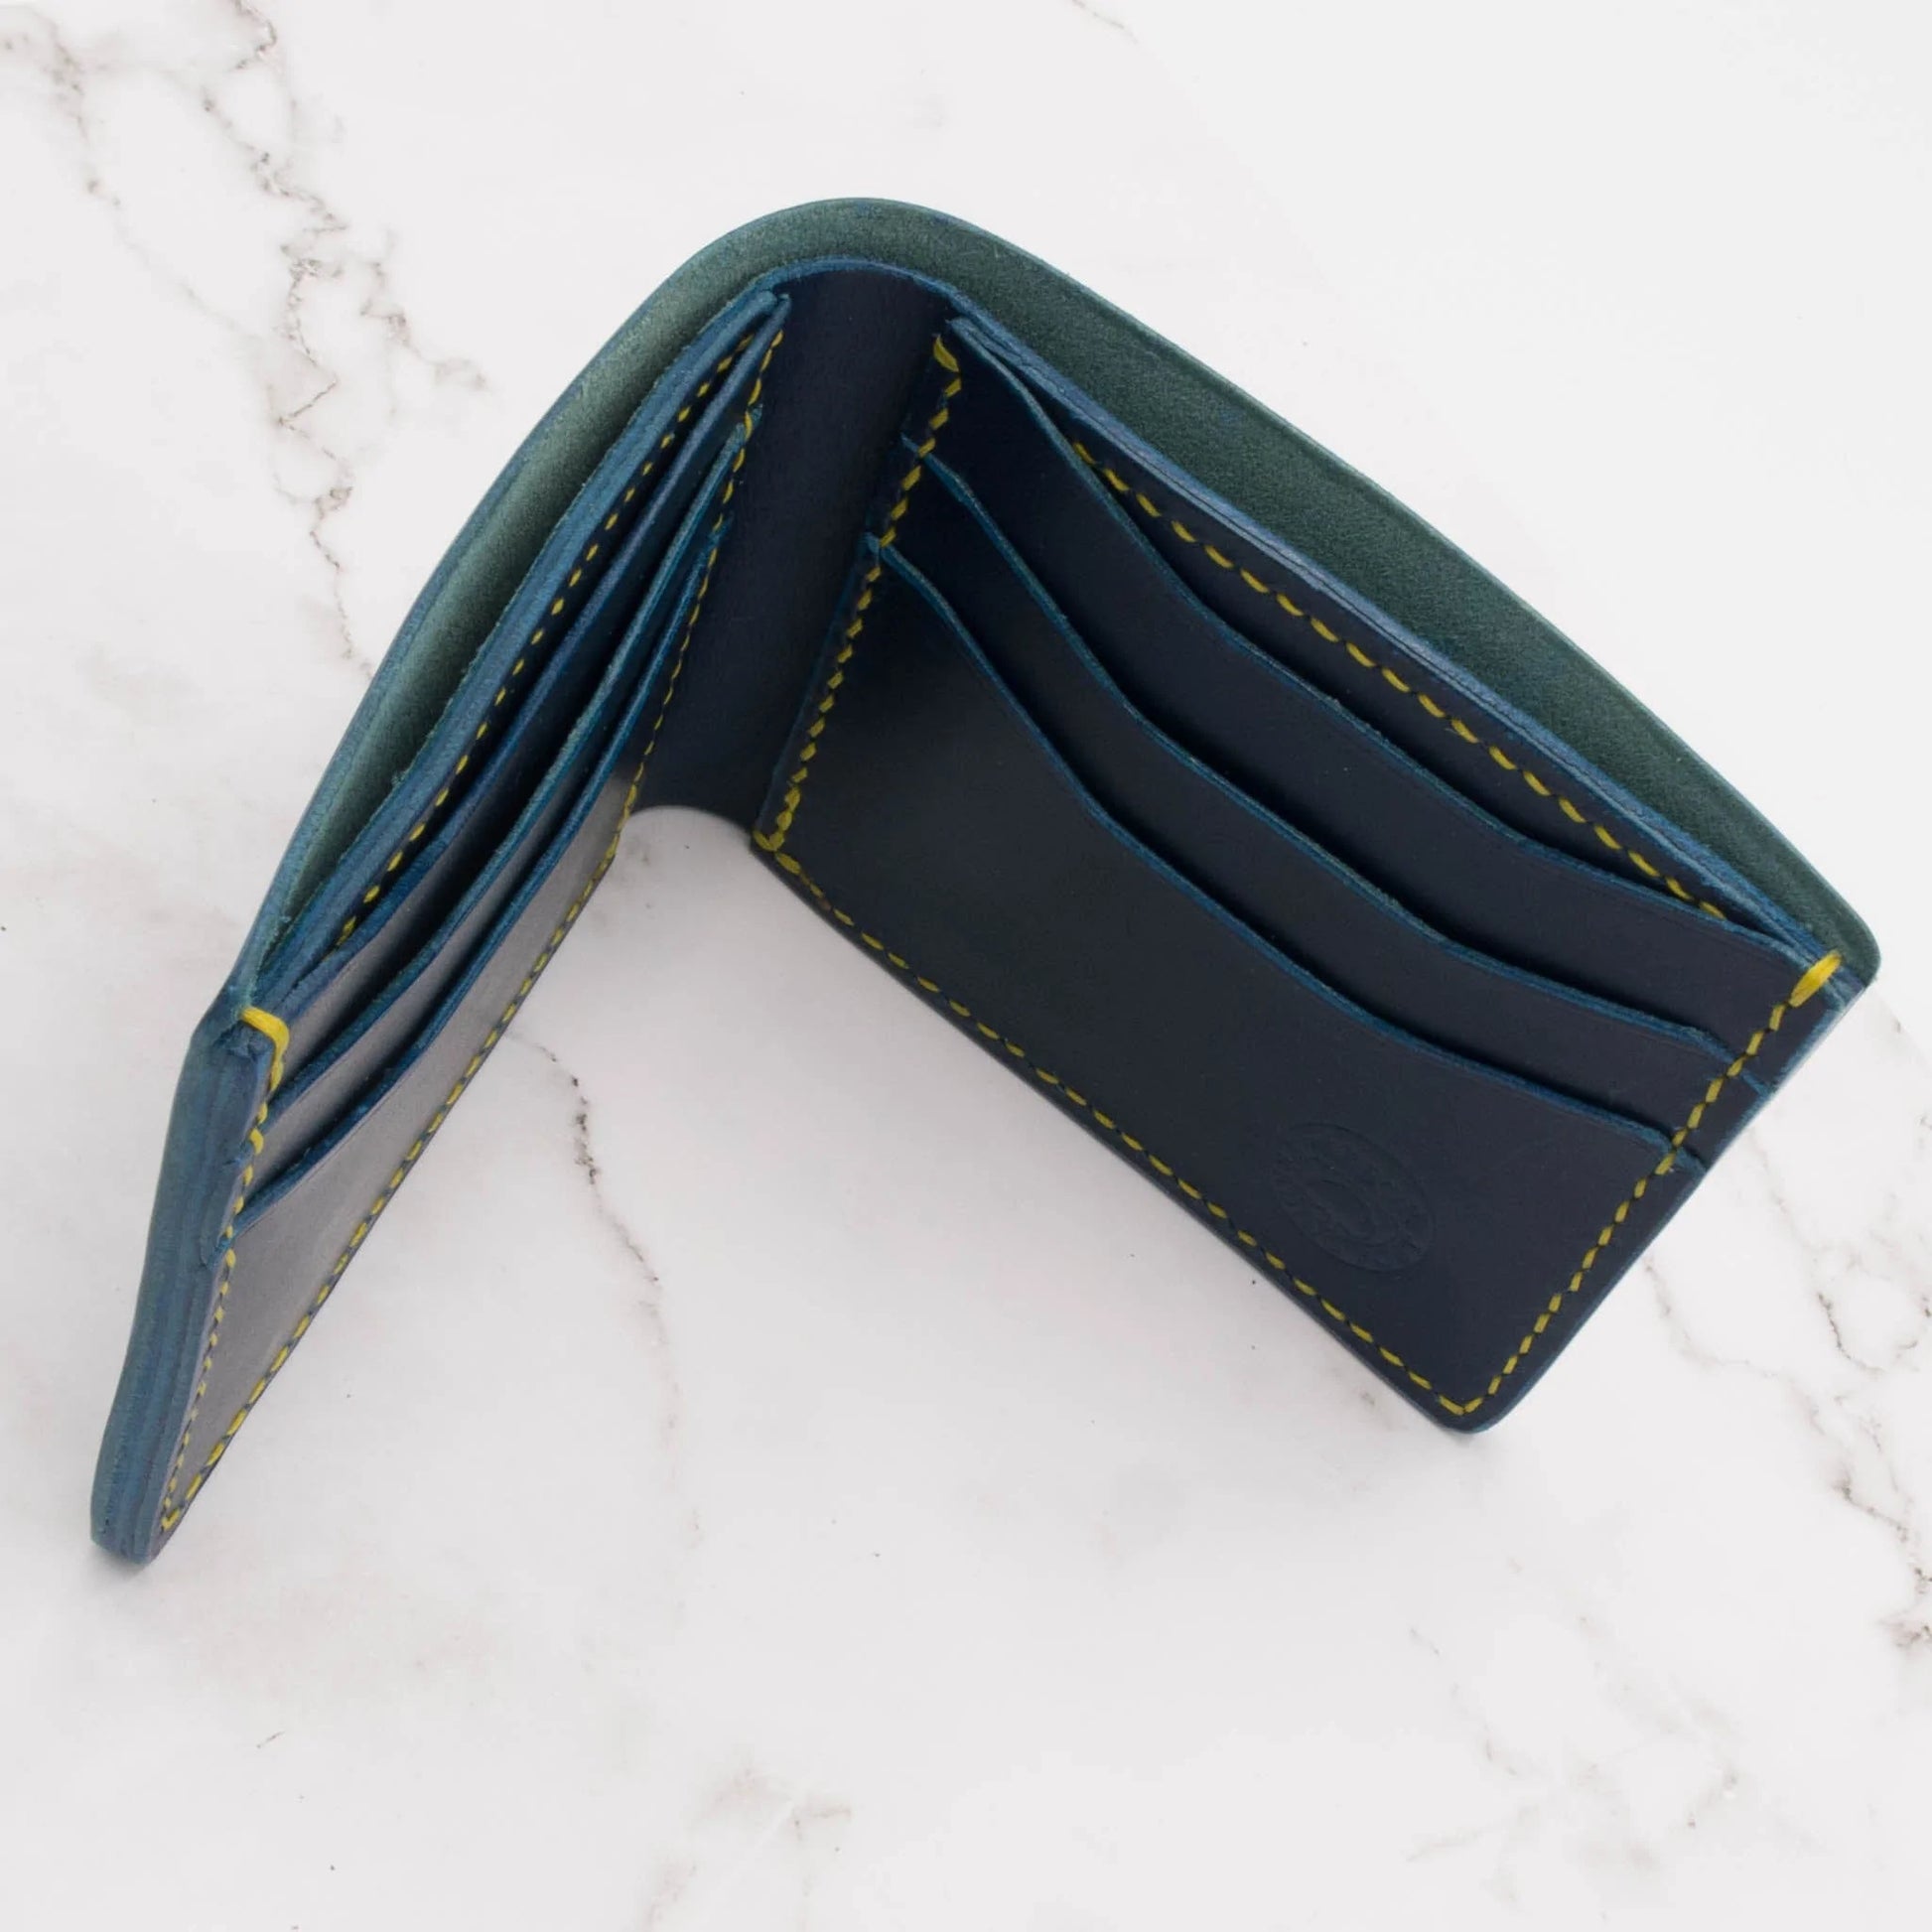 Cheekoo's Handcrafted Classic Leather Bifold Wallet